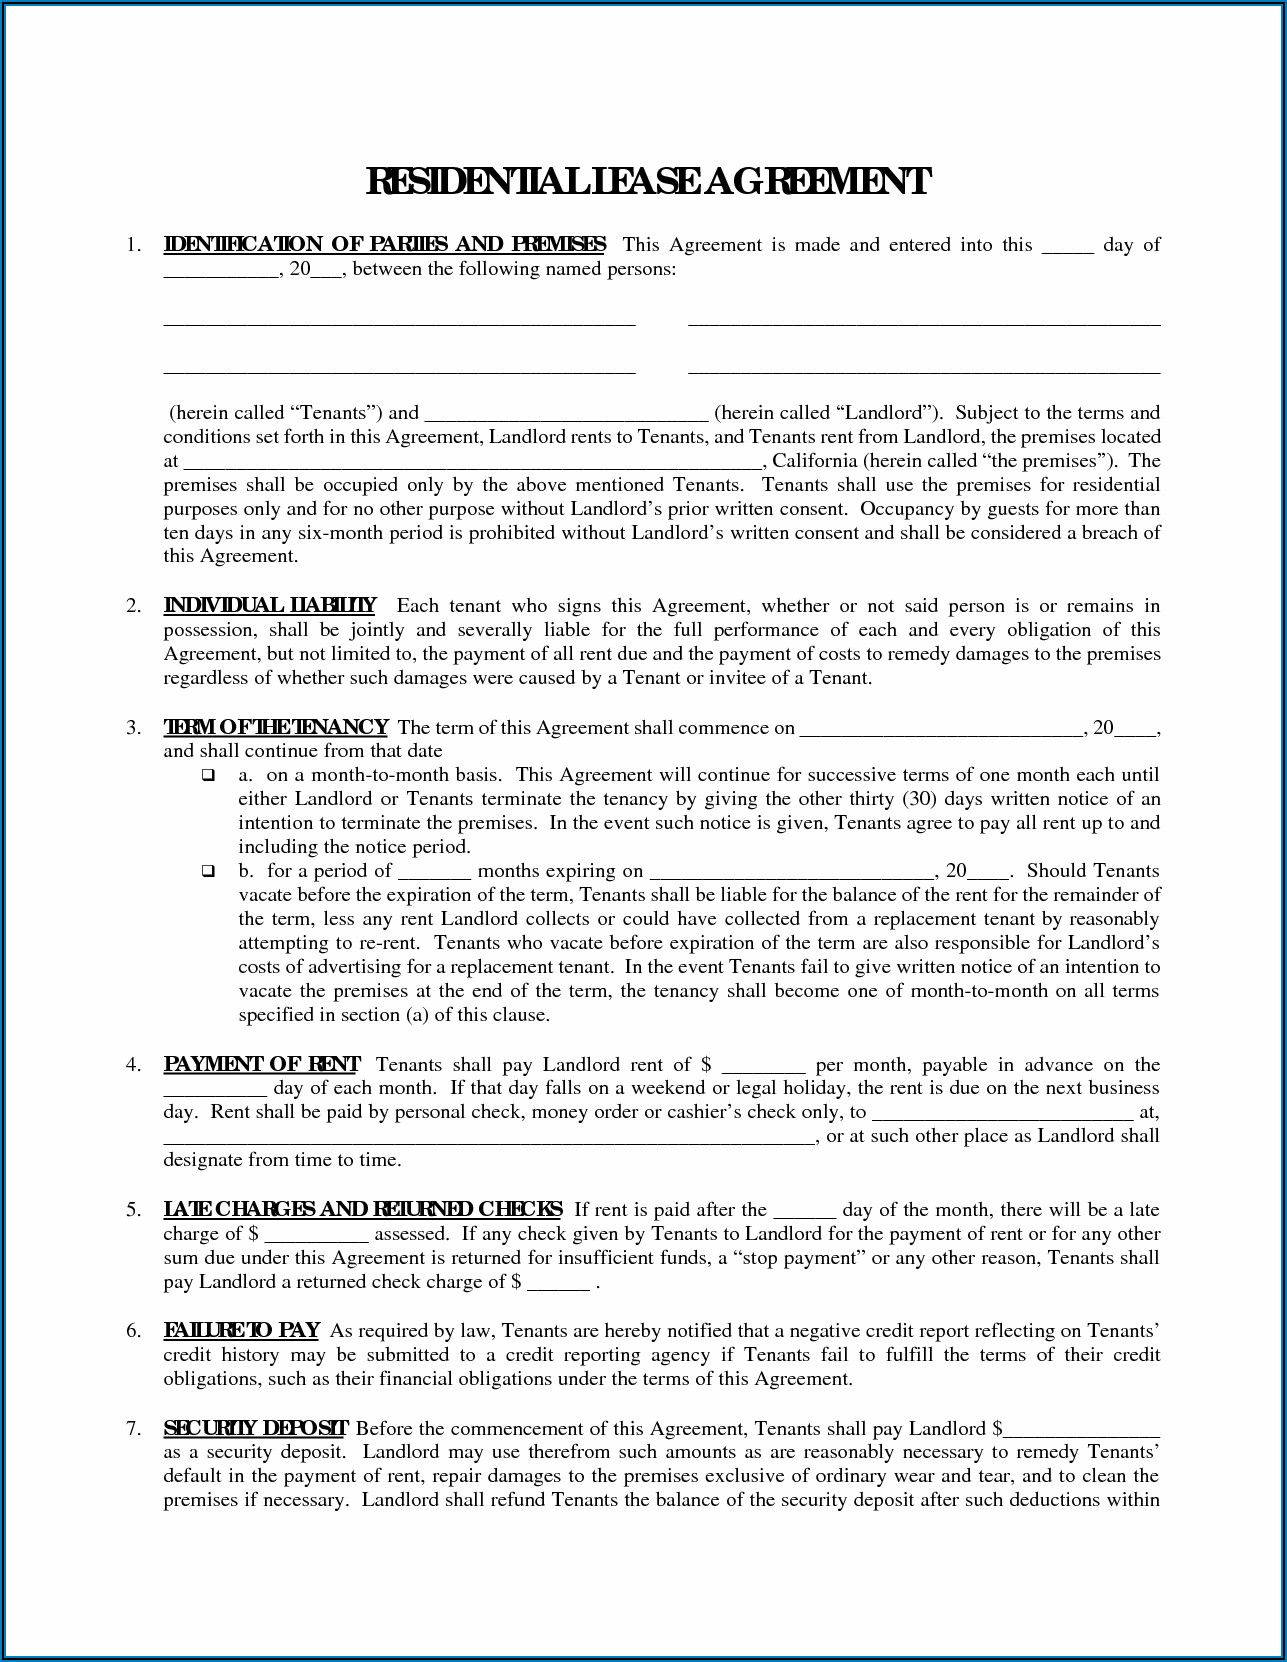 Residential Lease Agreement Printable Free